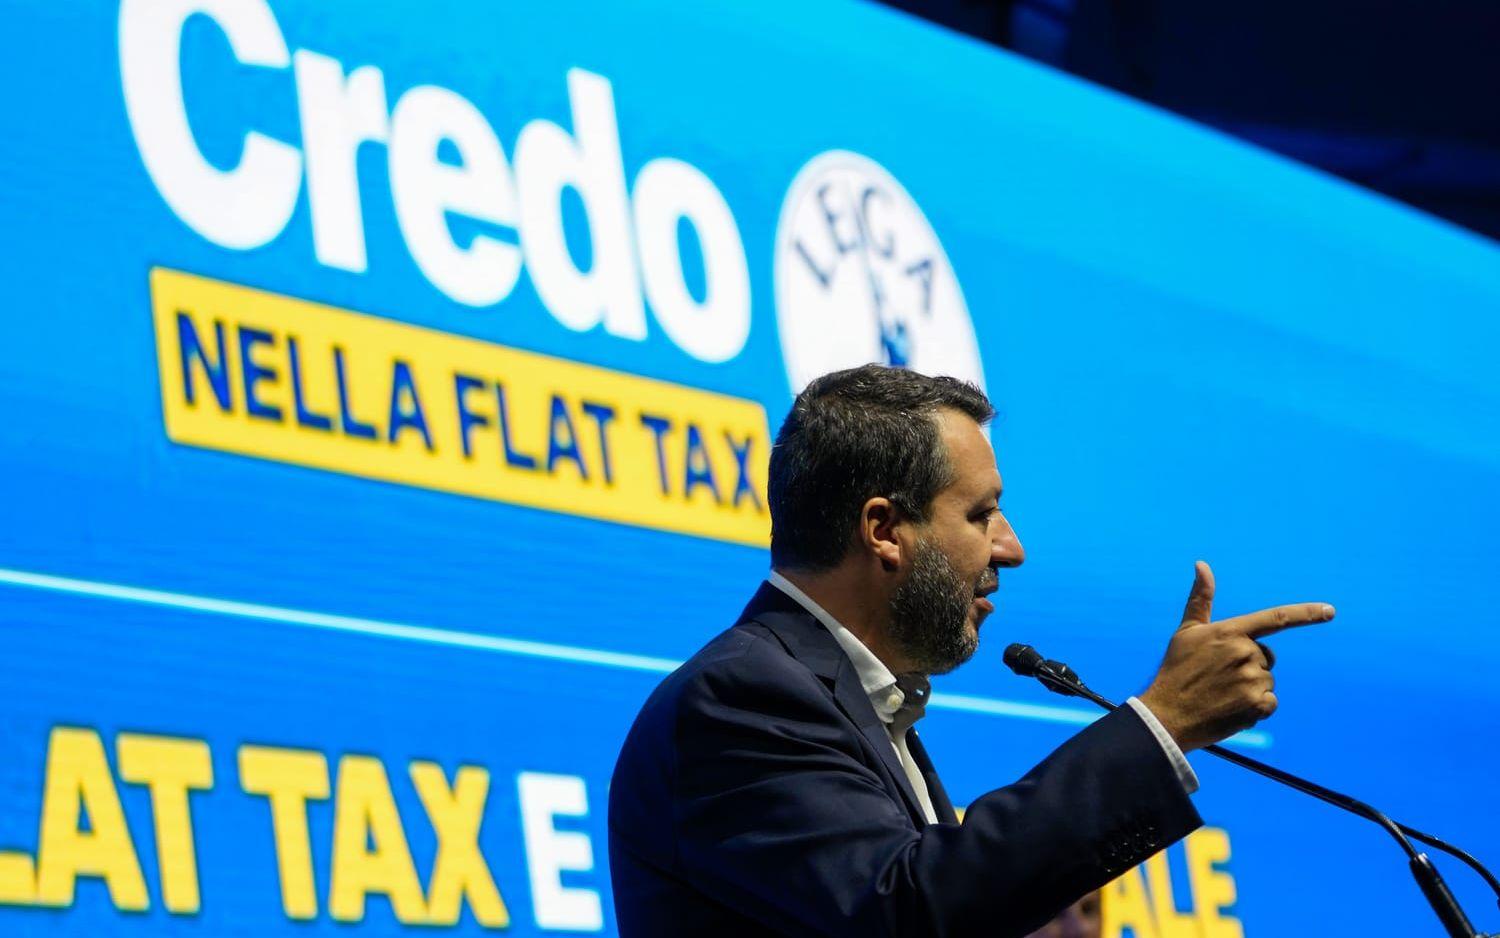 Leader of The League party Matteo Salvini delivers his speech during an event ahead of Sept. 25 general elections, in Milan, Italy, Saturday, Sept. 17, 2022. (AP Photo/Luca Bruno)  XLB102